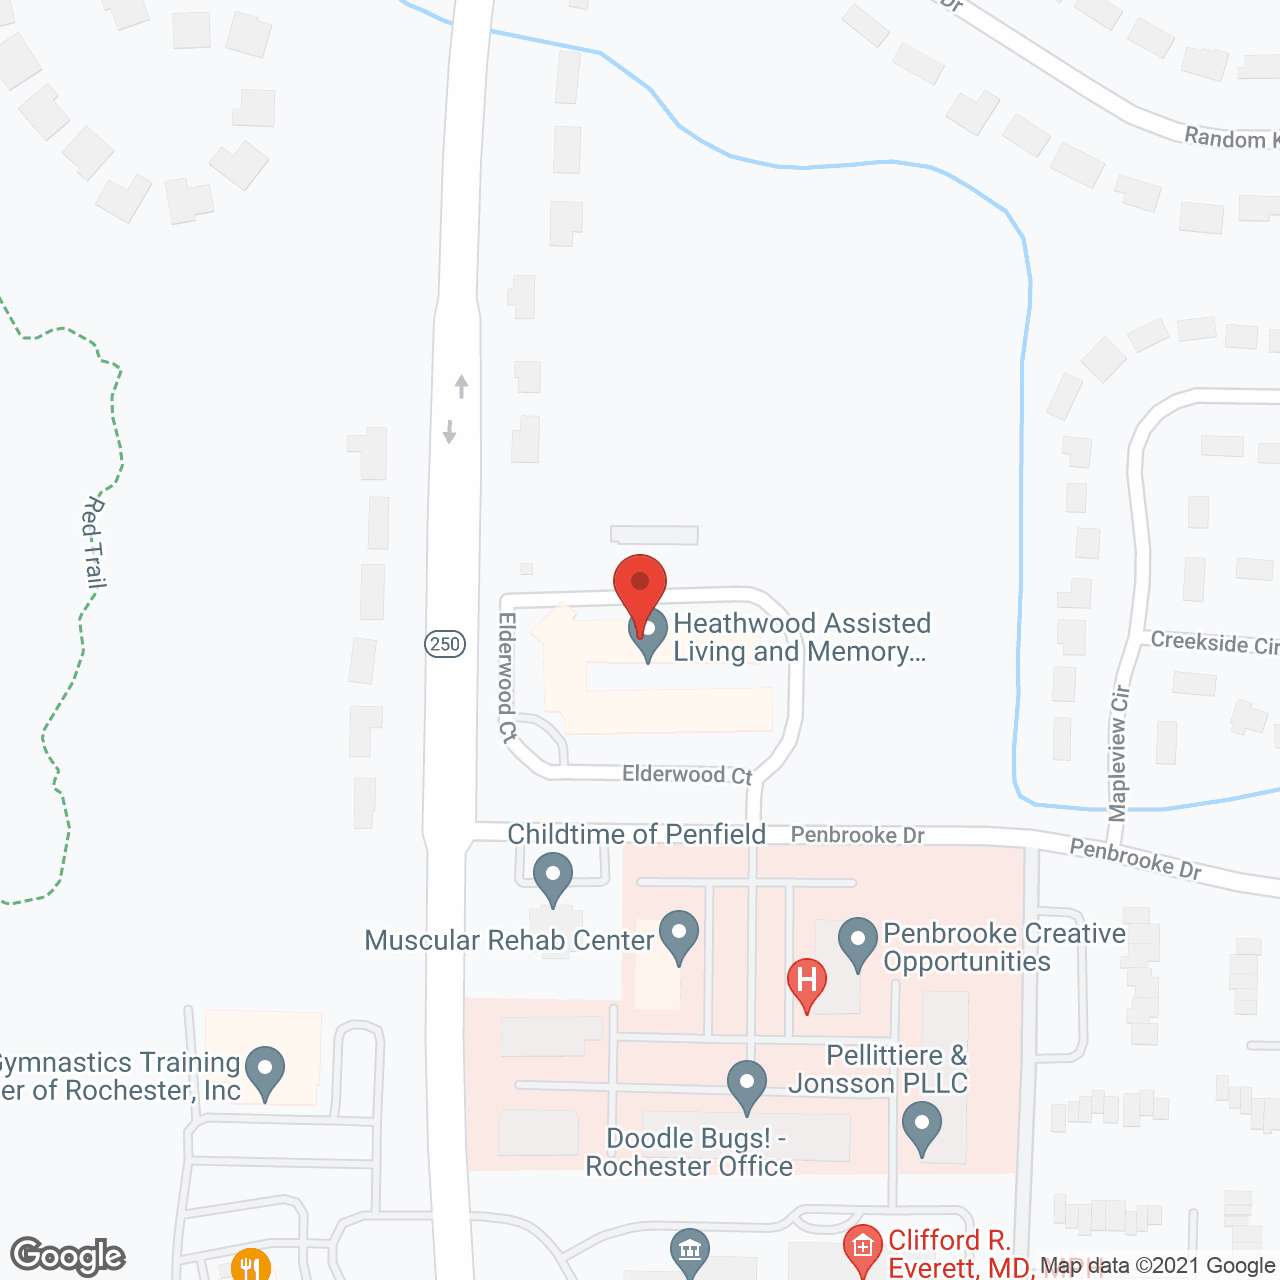 Heathwood Assisted Living at Penfield in google map